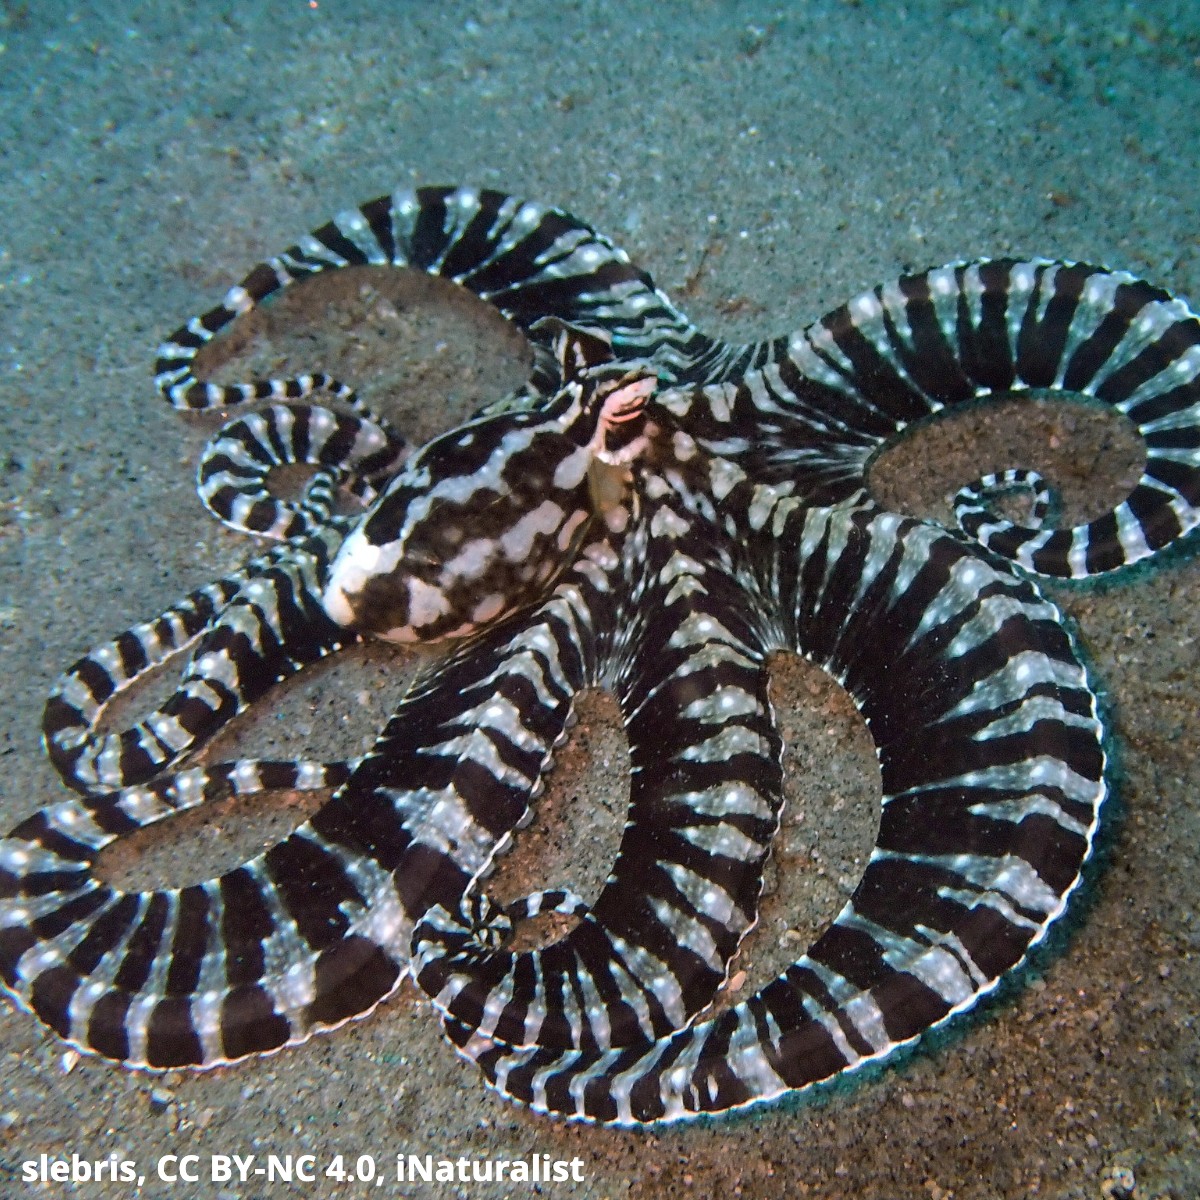 Meet a master of disguise, the mimic octopus! To protect itself from foes, this cephalopod masquerades as more dangerous animals. By contorting its body & using color-changing cells in its skin, it can take on the appearance of sea snakes, lionfish, & other toxic ocean-dwellers.